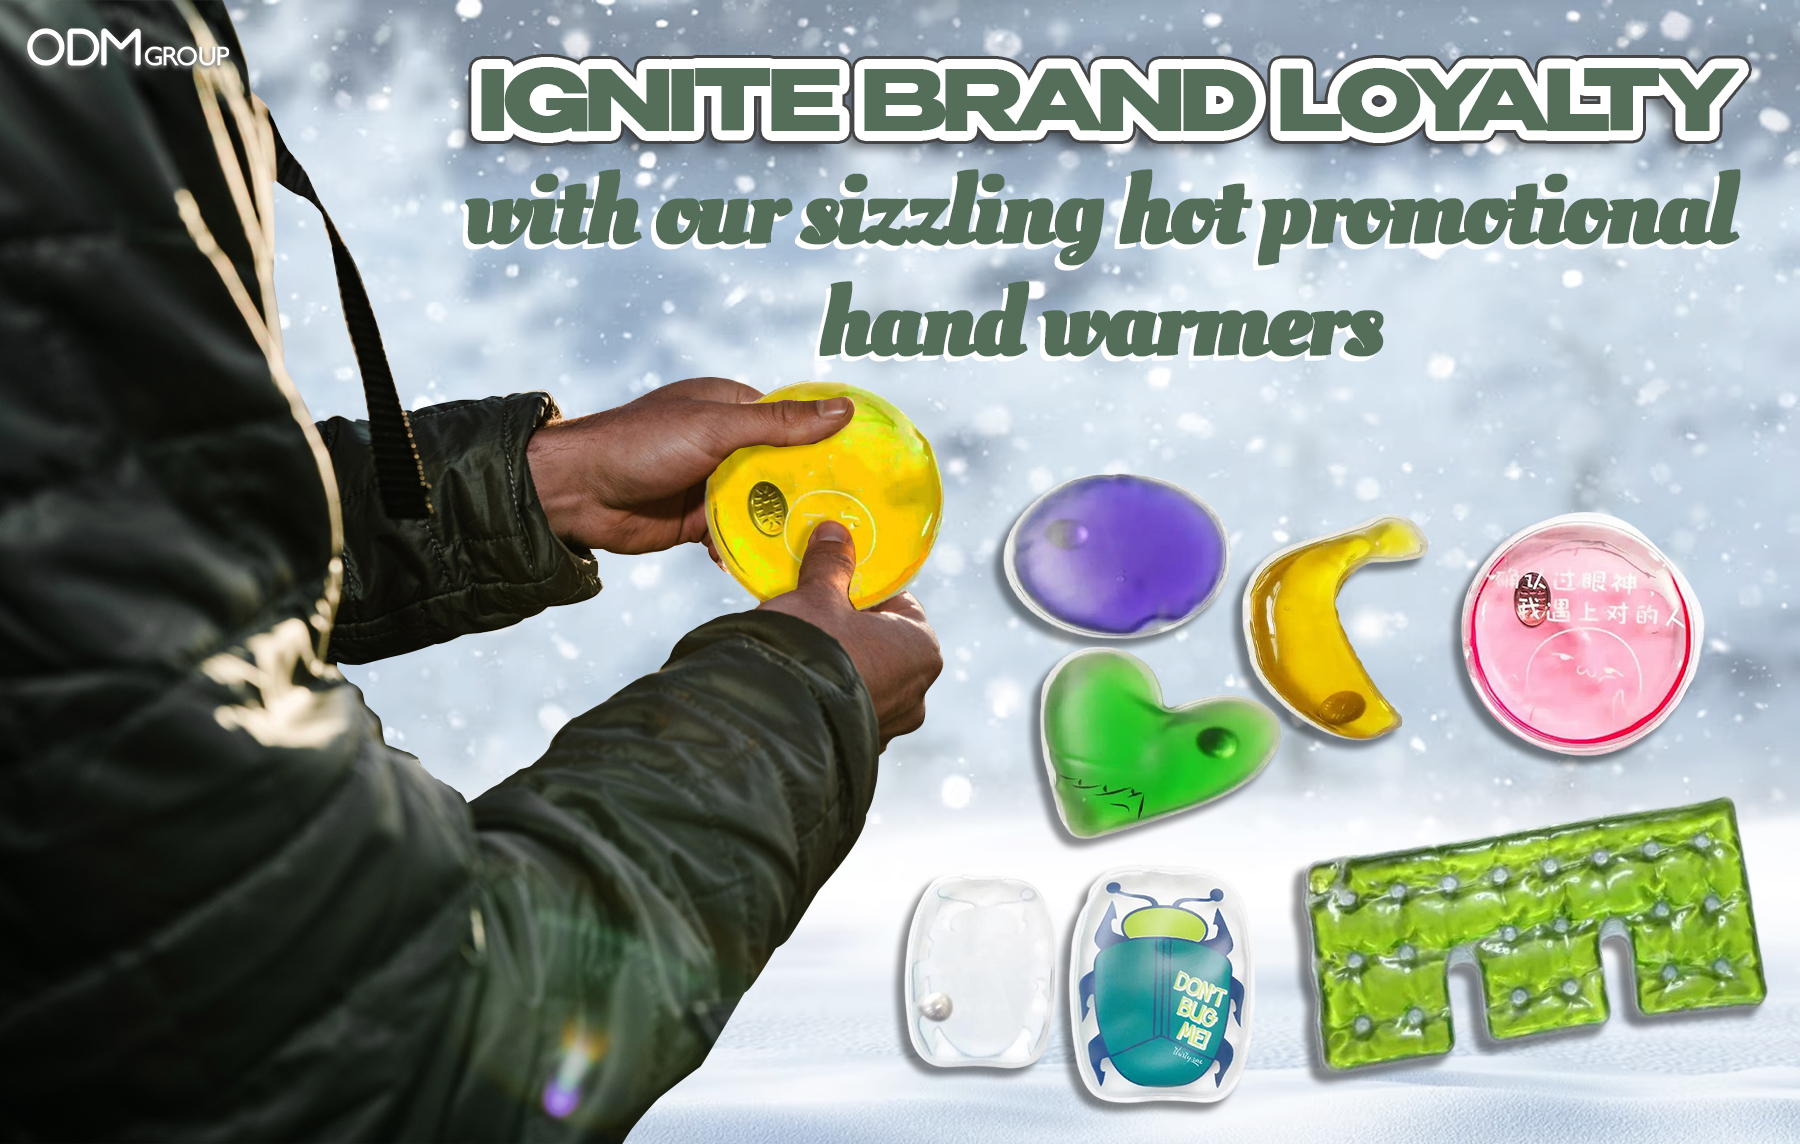 Promotional hand warmers in various shapes and colors.